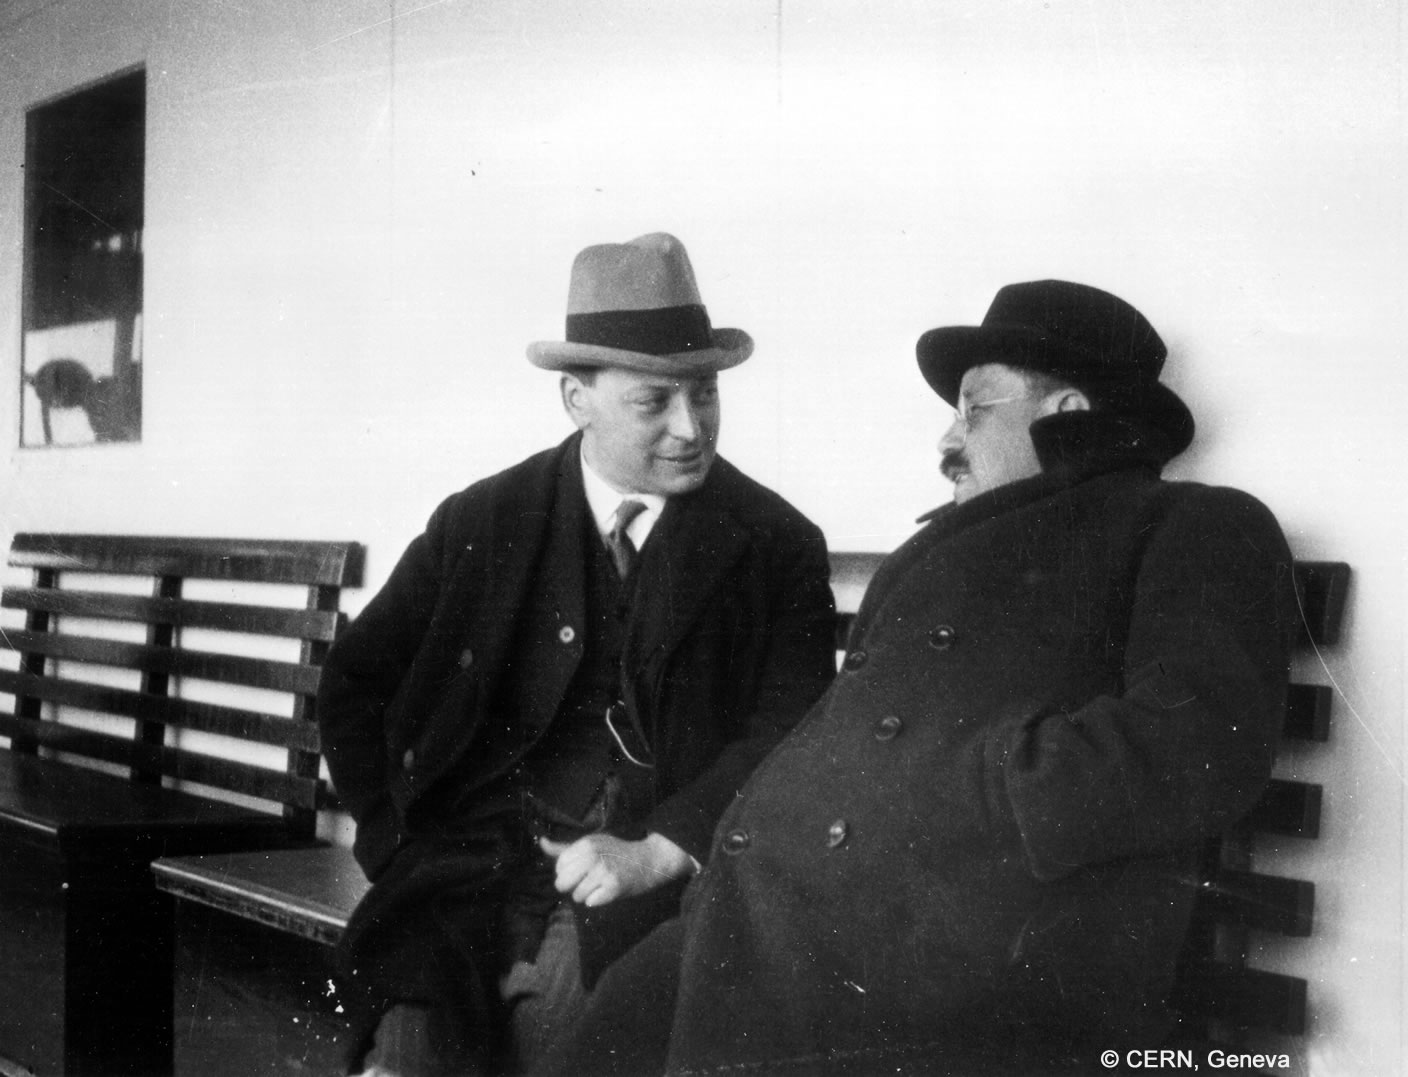 Wolfgang Pauli and Paul Ehrenfest sitting on a bench